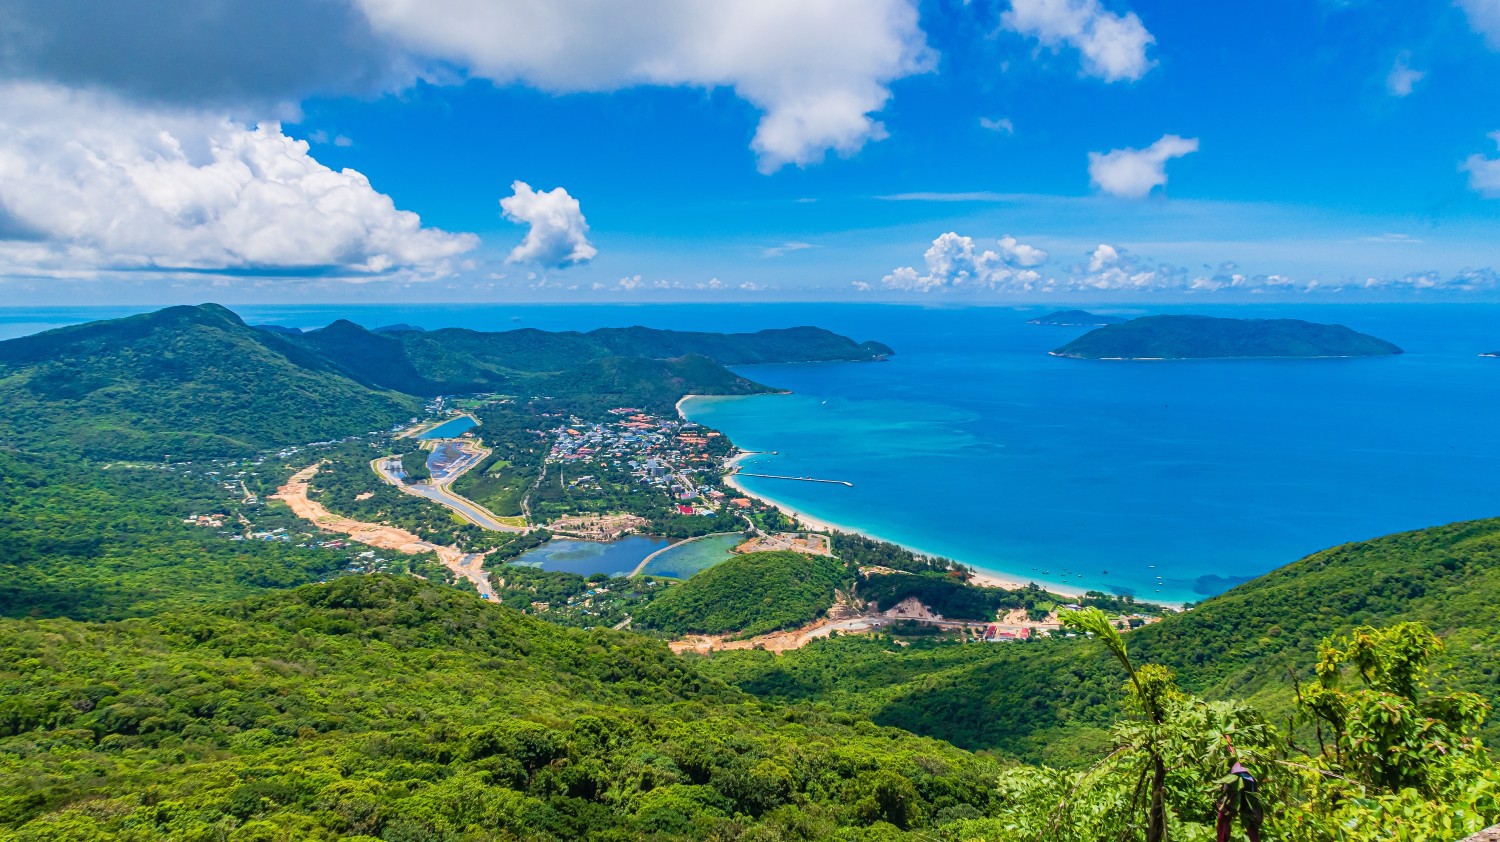 Take in the breathtaking views that Vietnam has to offer - from stunning waterfalls and towering mountains to lush tropics and dramatic coastlines - vietnam vacation packages